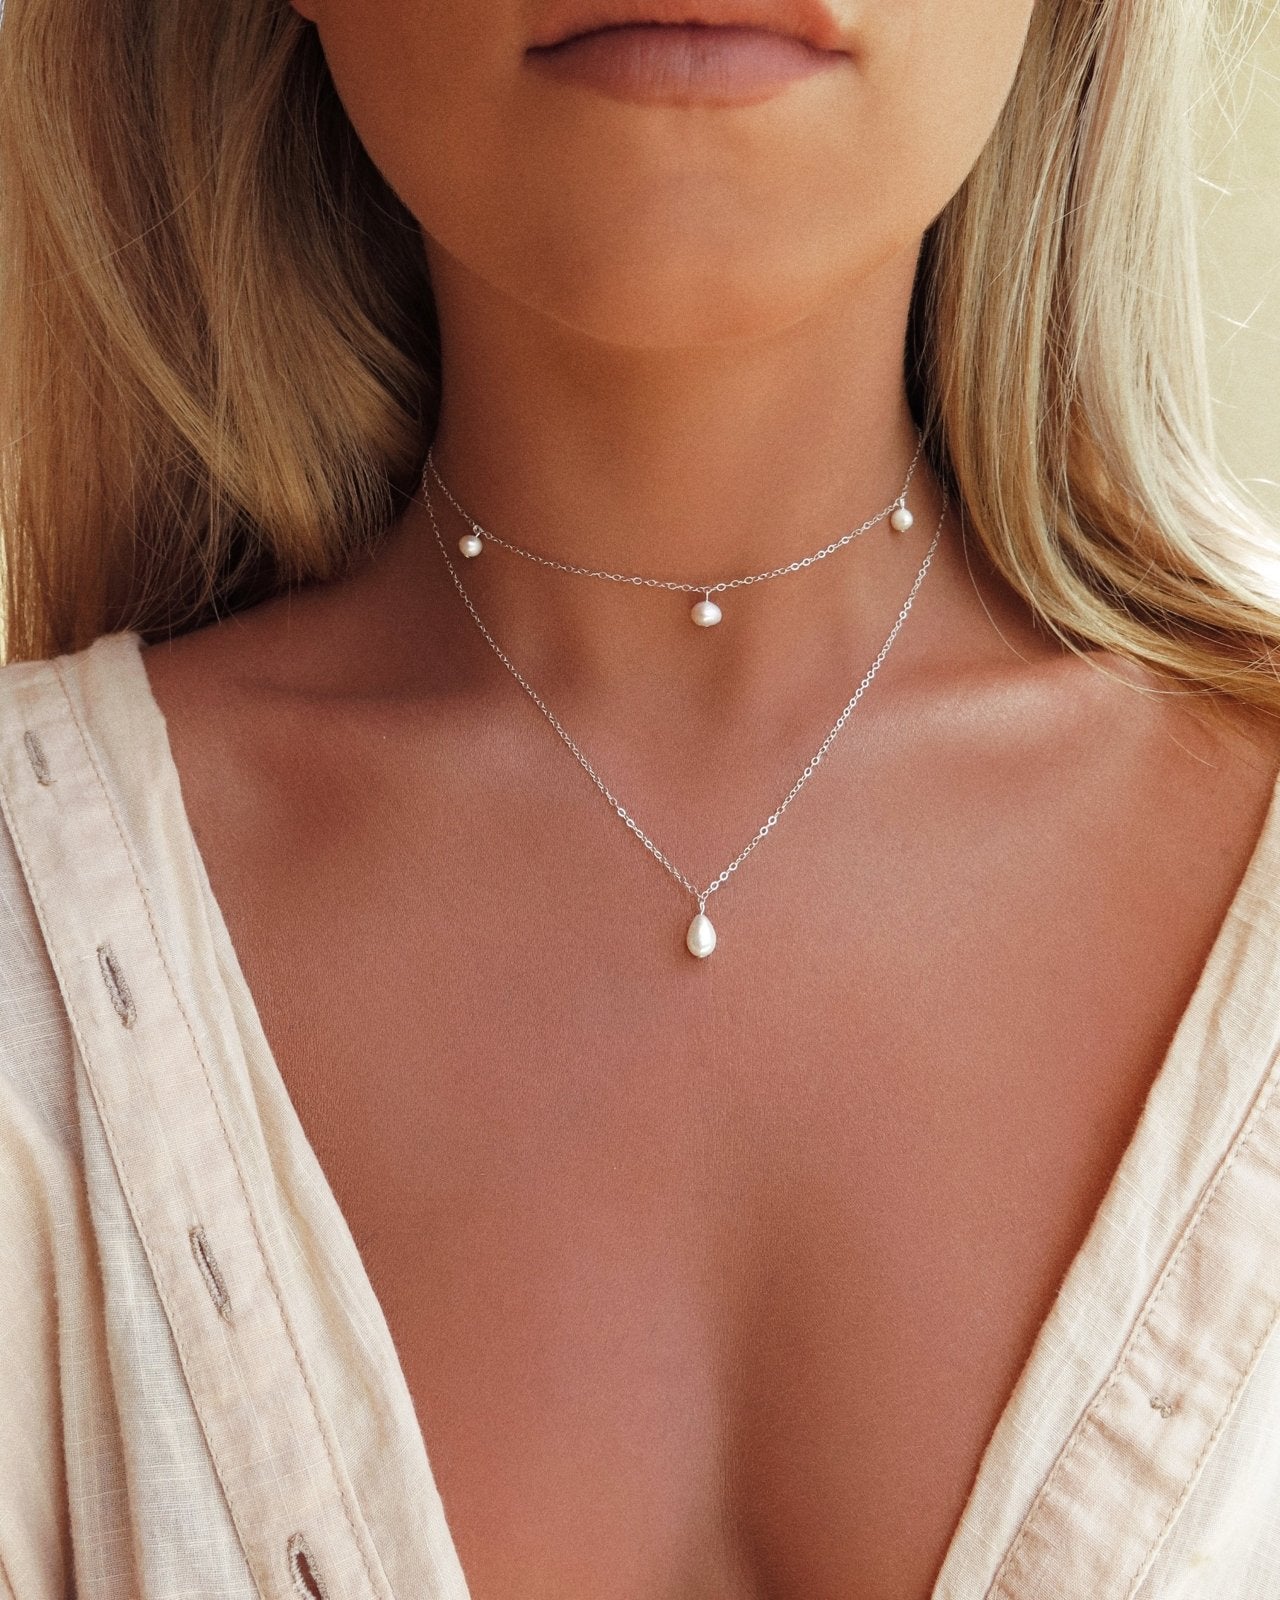 TRIPLE FRESHWATER PEARL NECKLACE- 14k Gold - The Littl - 14k Yellow Gold Fill - Deluxe Chain